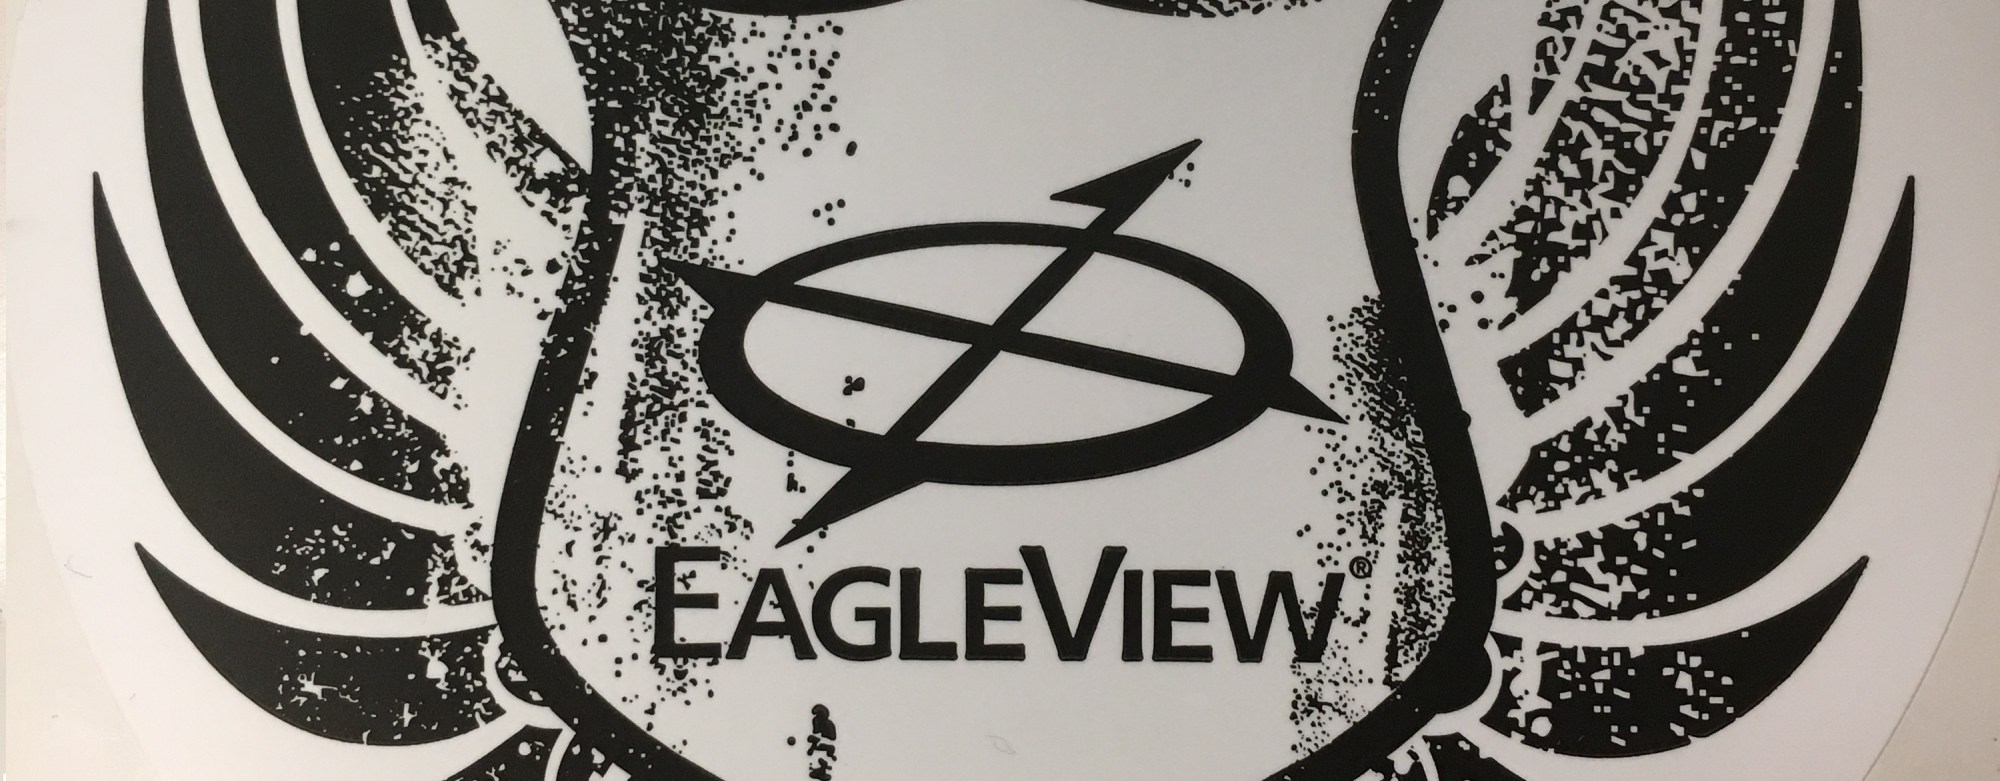 EagleViewEVerywhere Decal - Featured